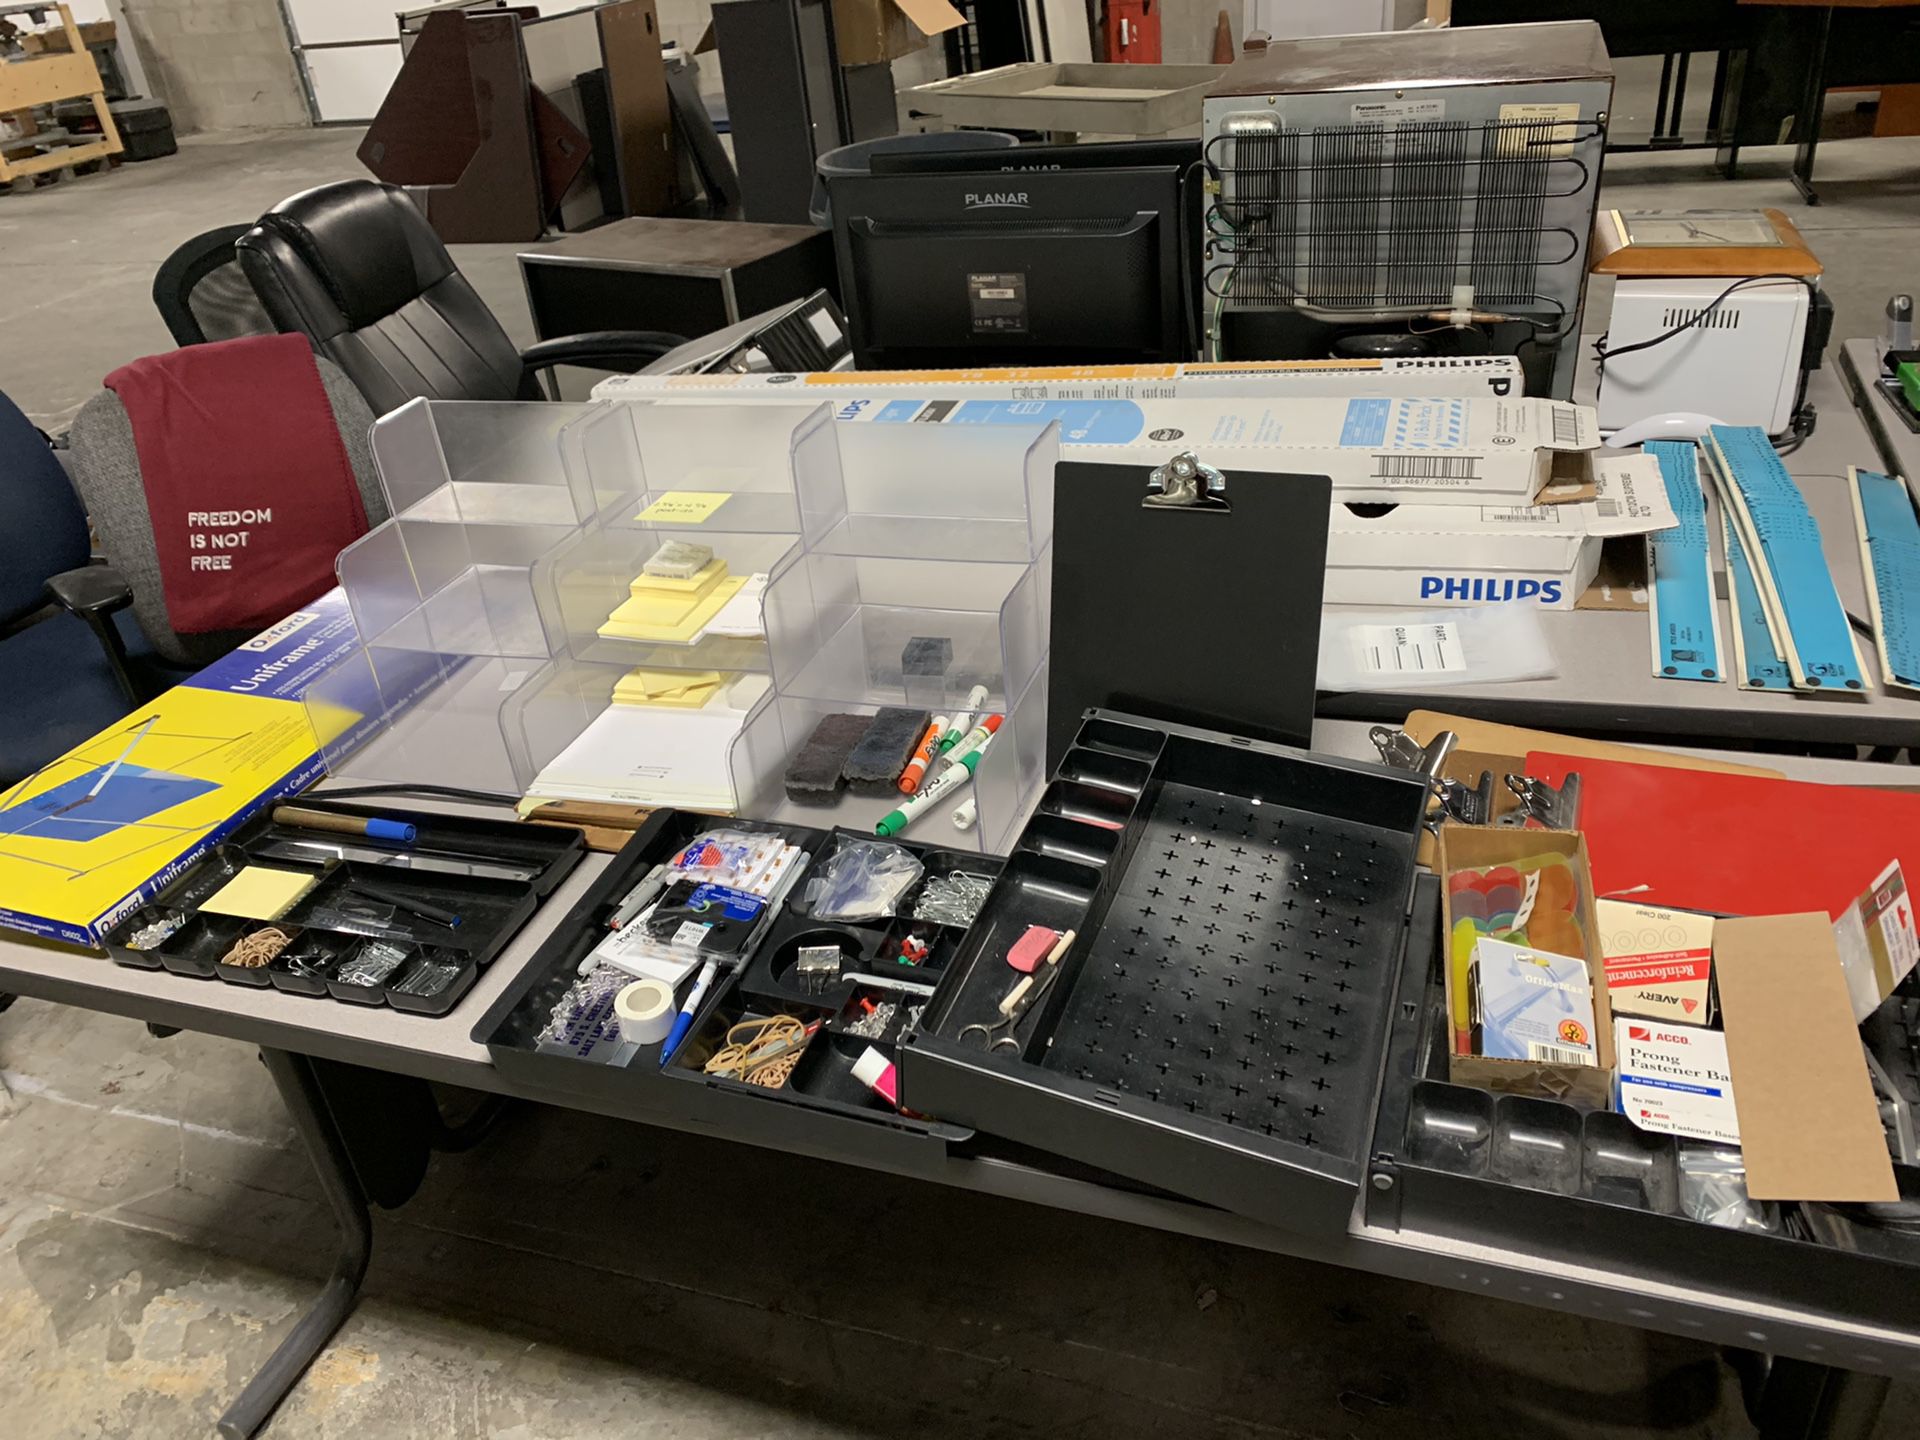 Free office supplies